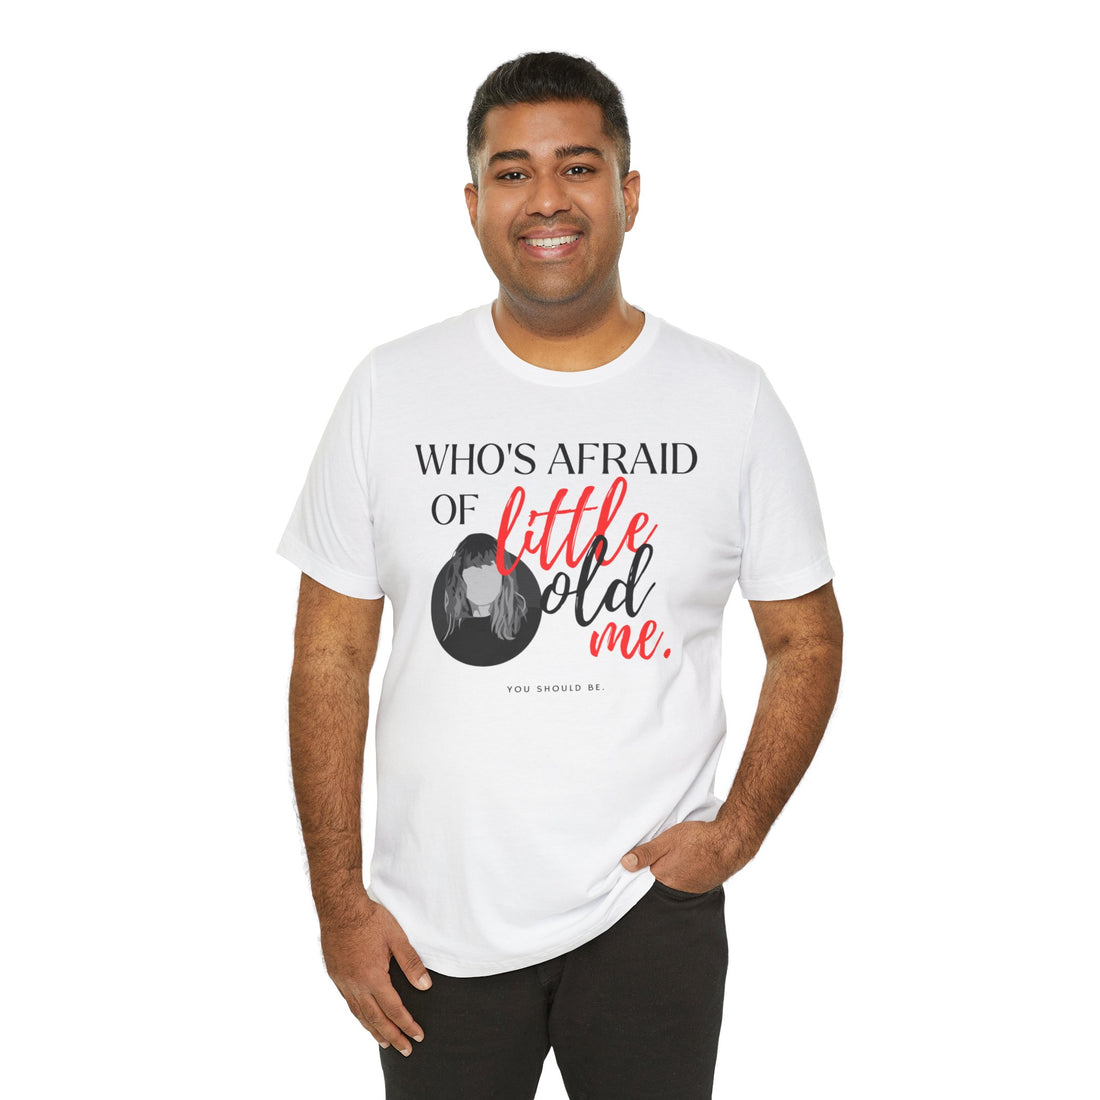 Who's Afraid of Little Old Me? TTPD Taylor Swift Lyric Tee